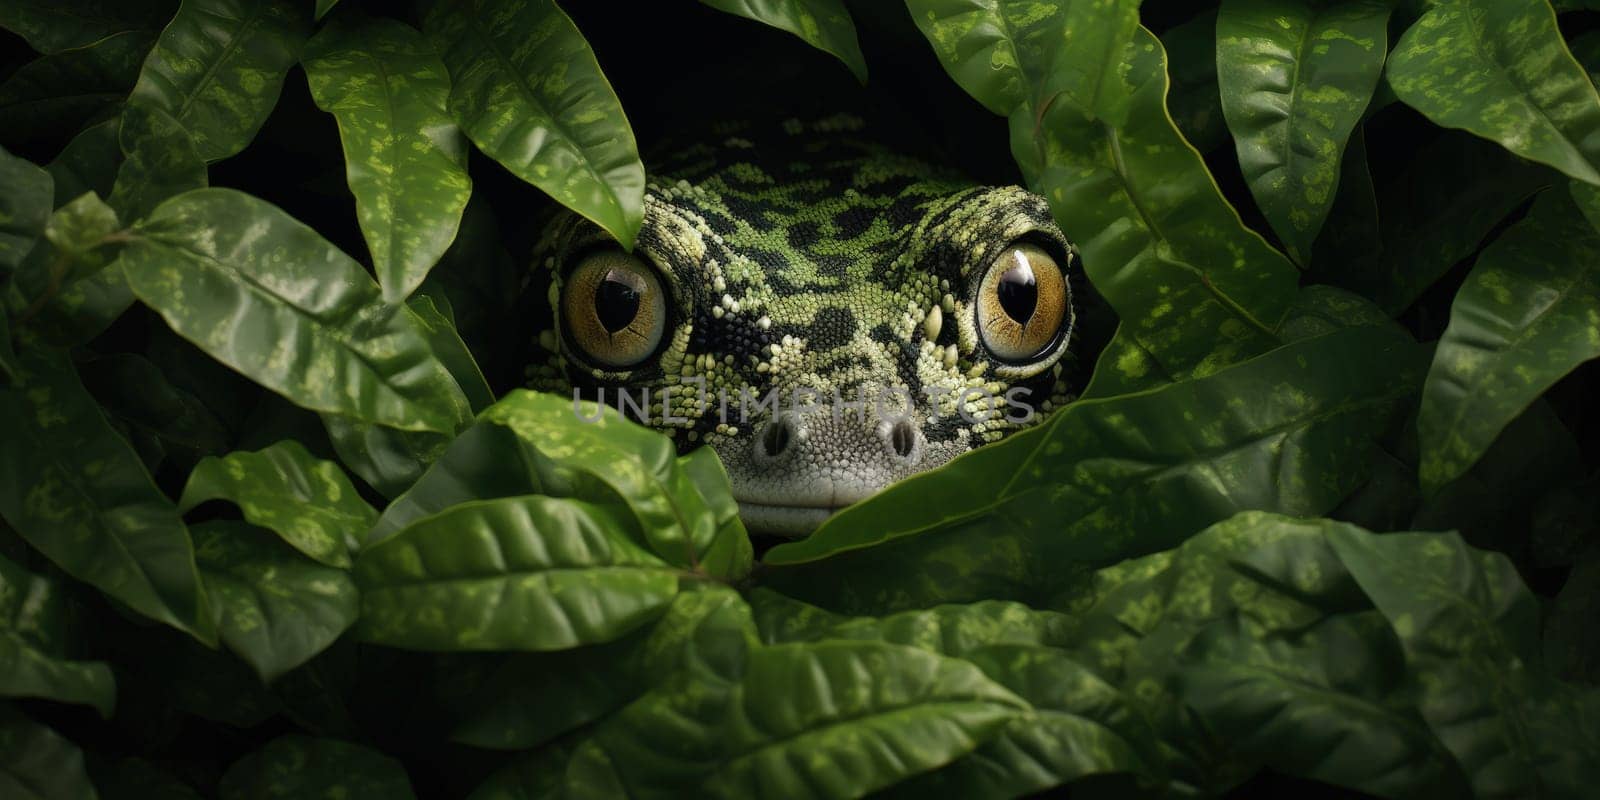 An intimate portrayal of a gecko in a front view, expertly camouflaged among the greenery of leaves